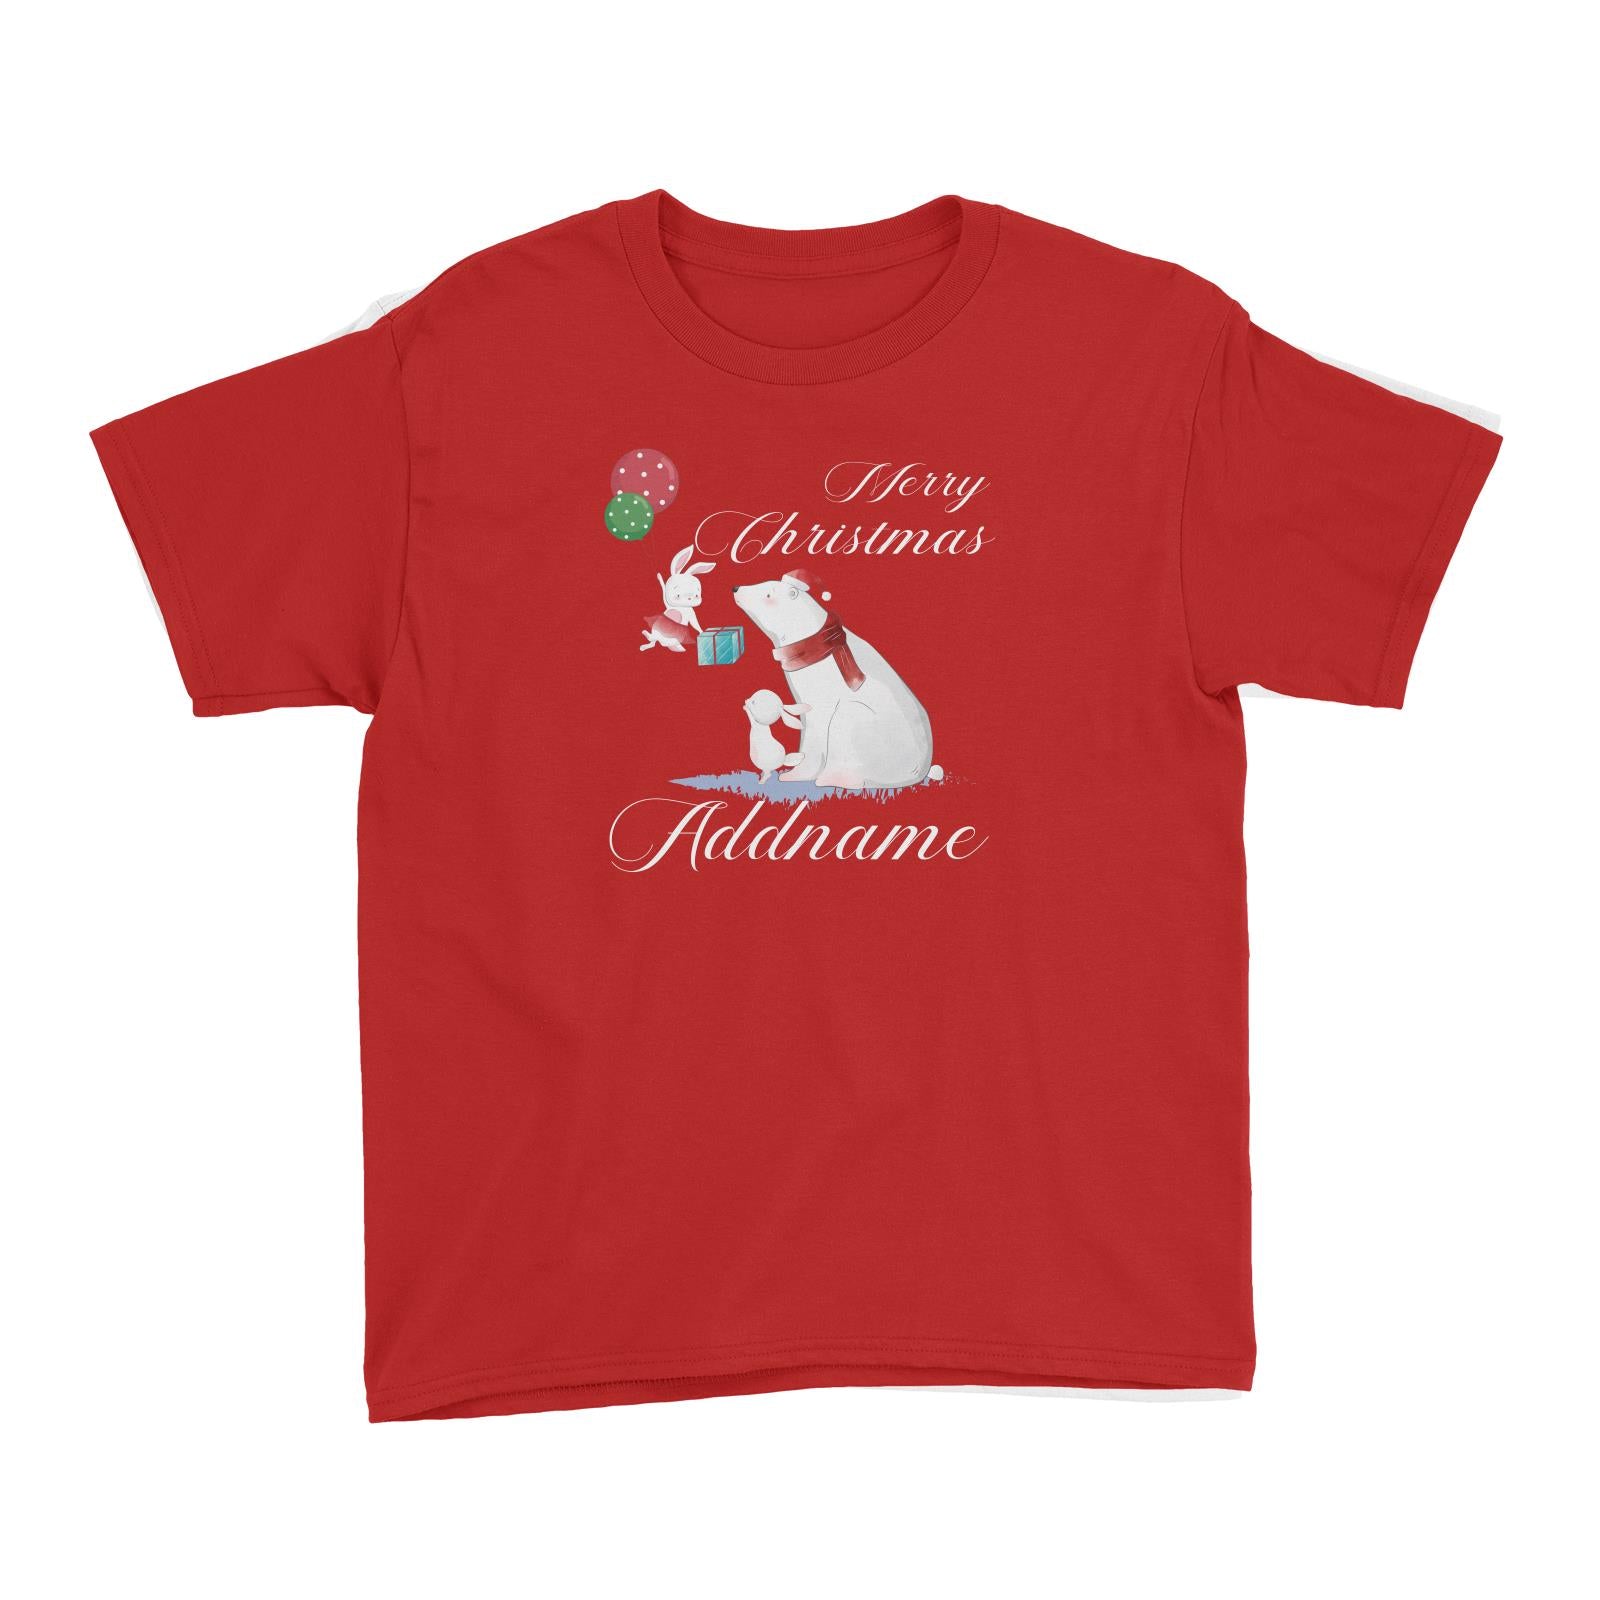 Christmas Cute Rabbits And Polar Bear With Present Merry Christmas Addname Kid's T-Shirt